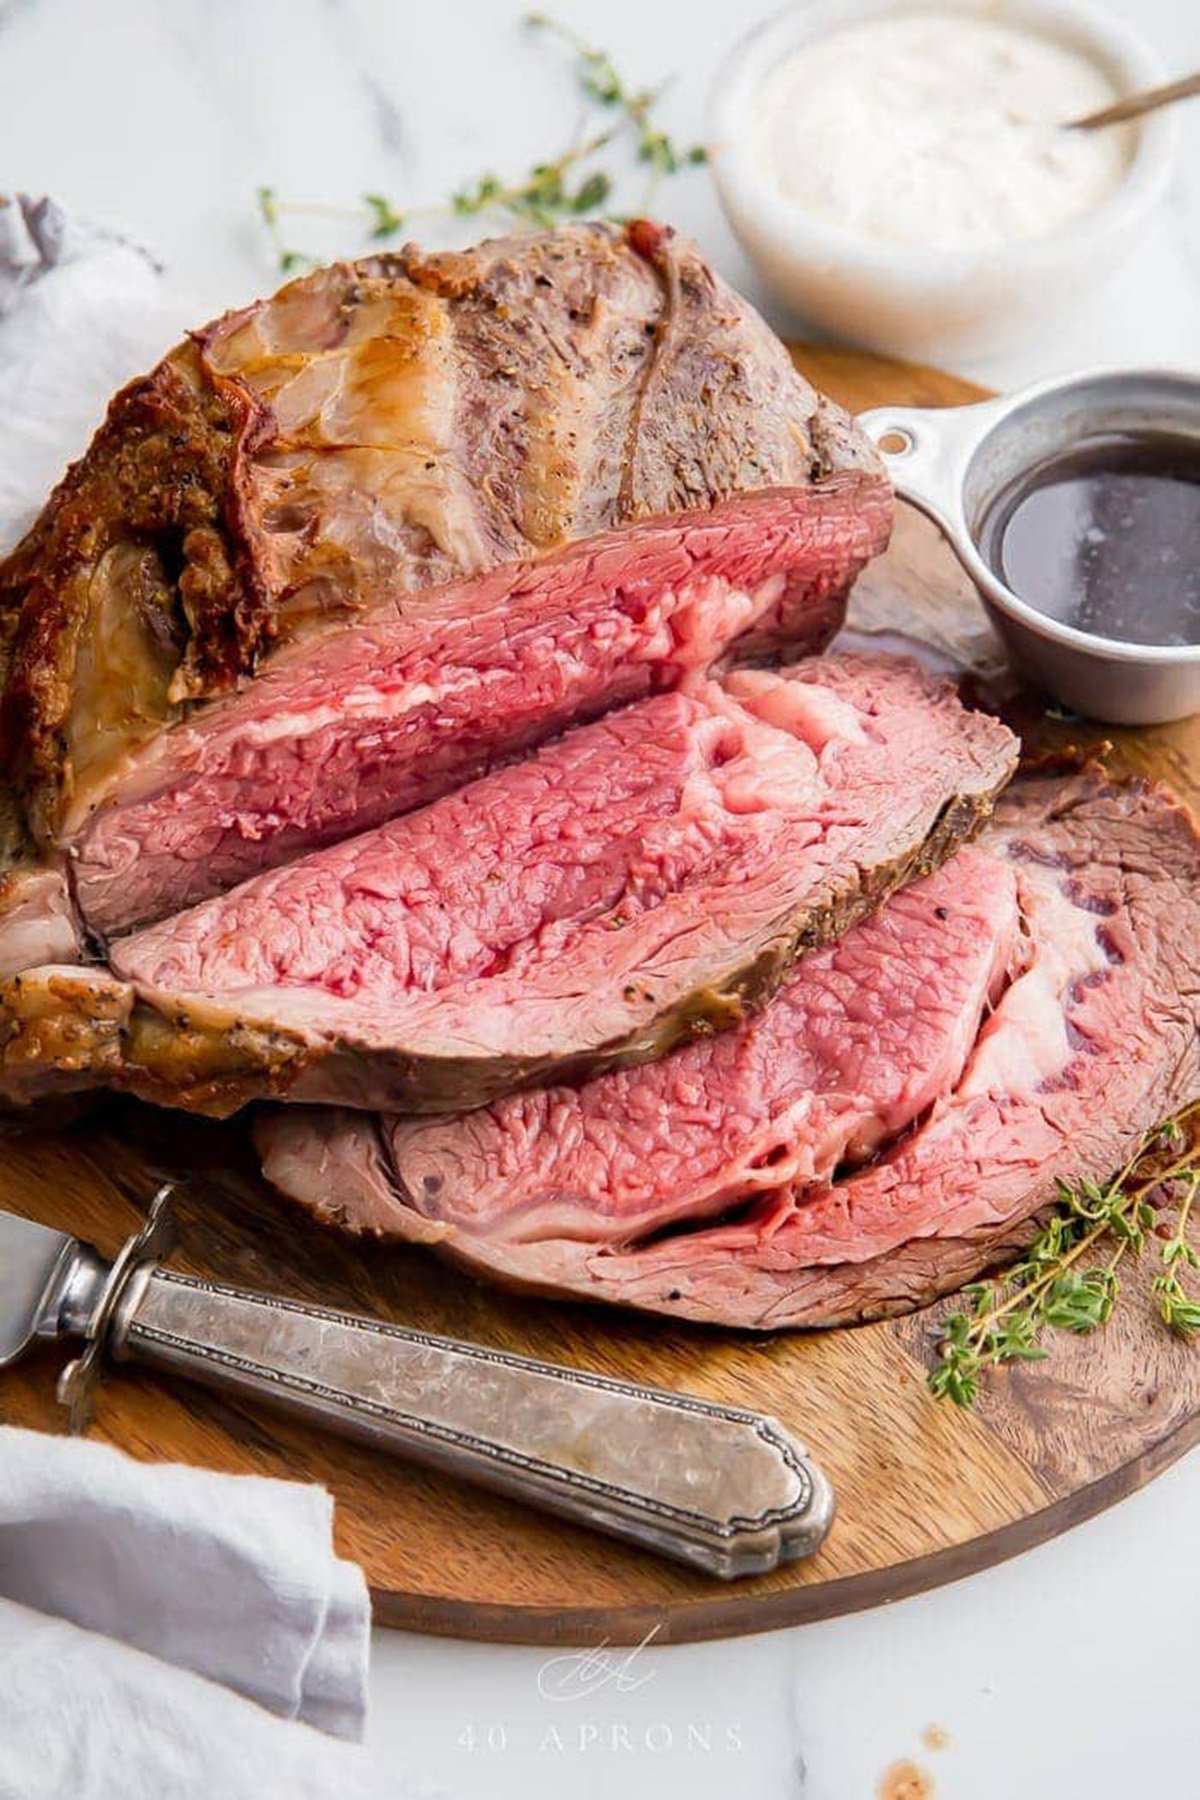 Carved, juicy prime rib resting on a wooden cutting board next to a small silver ramekin of au jus.